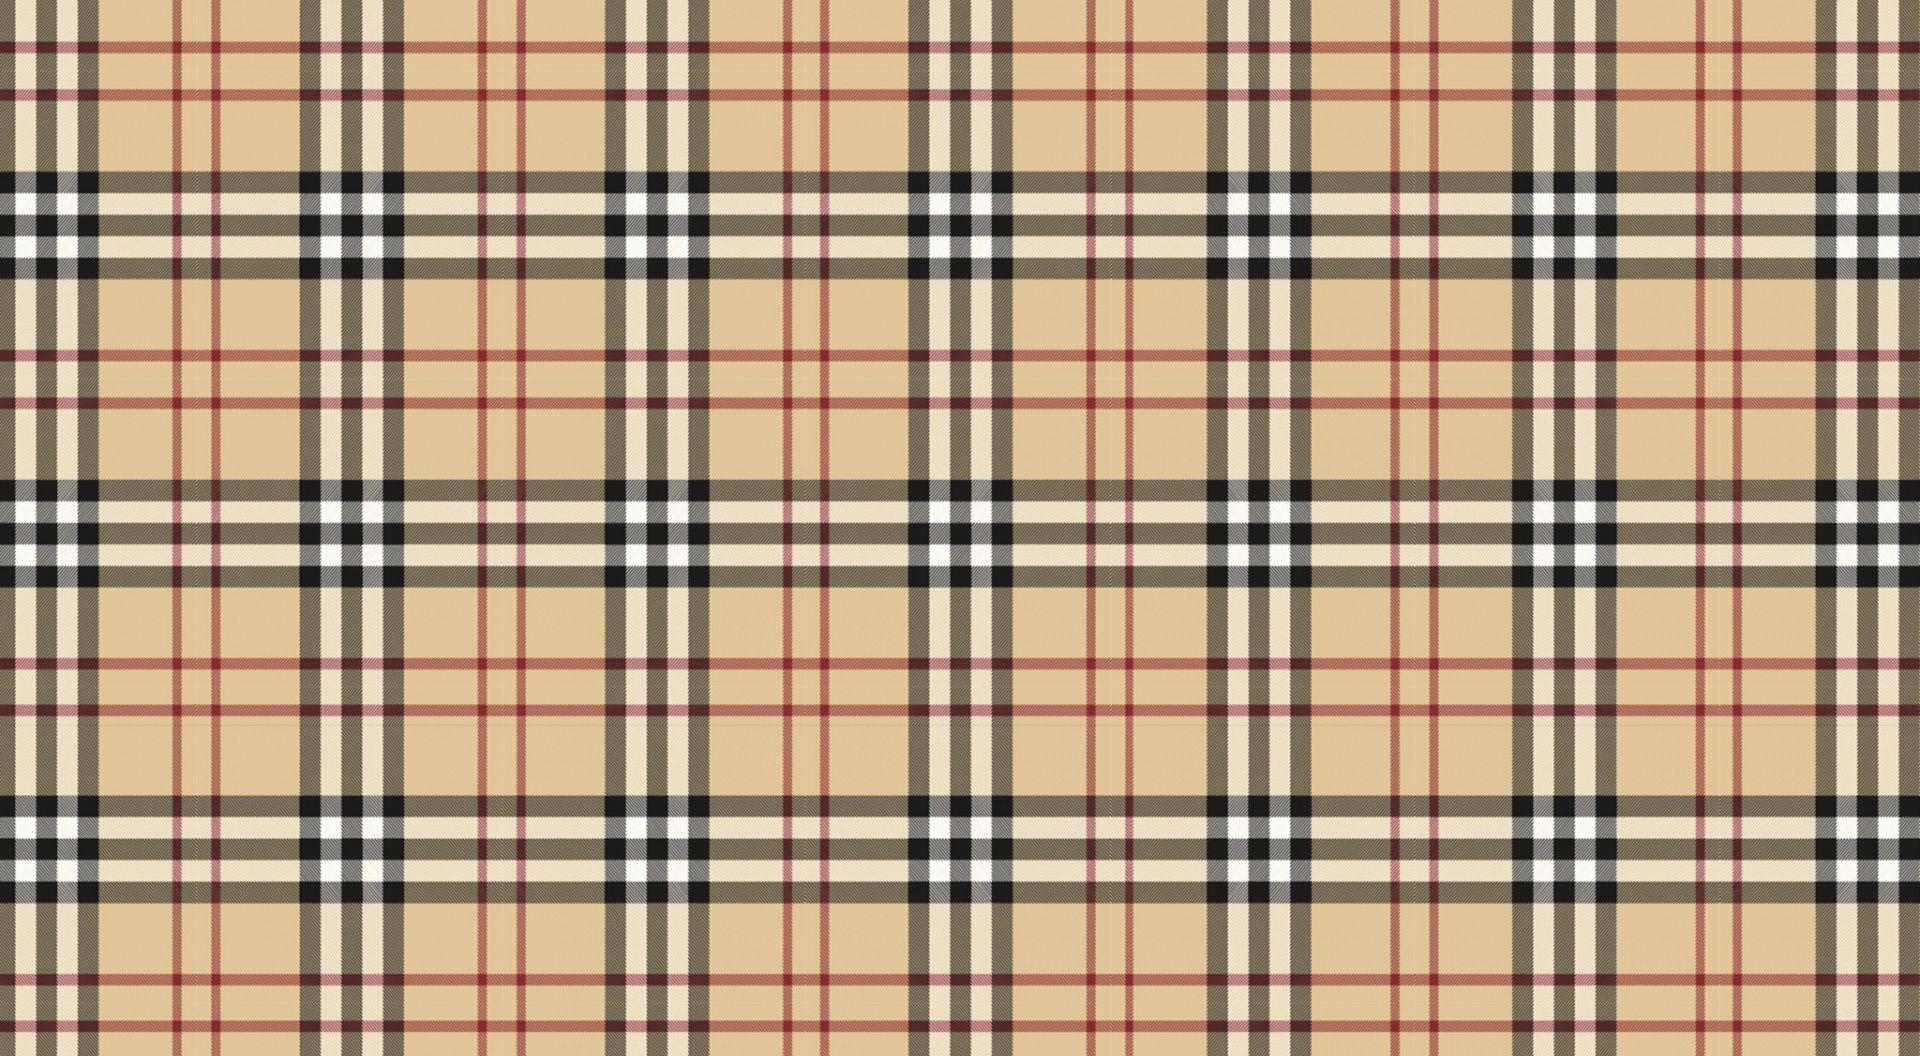 Burberry Pattern Wallpapers - Top Free Burberry Pattern Backgrounds ...